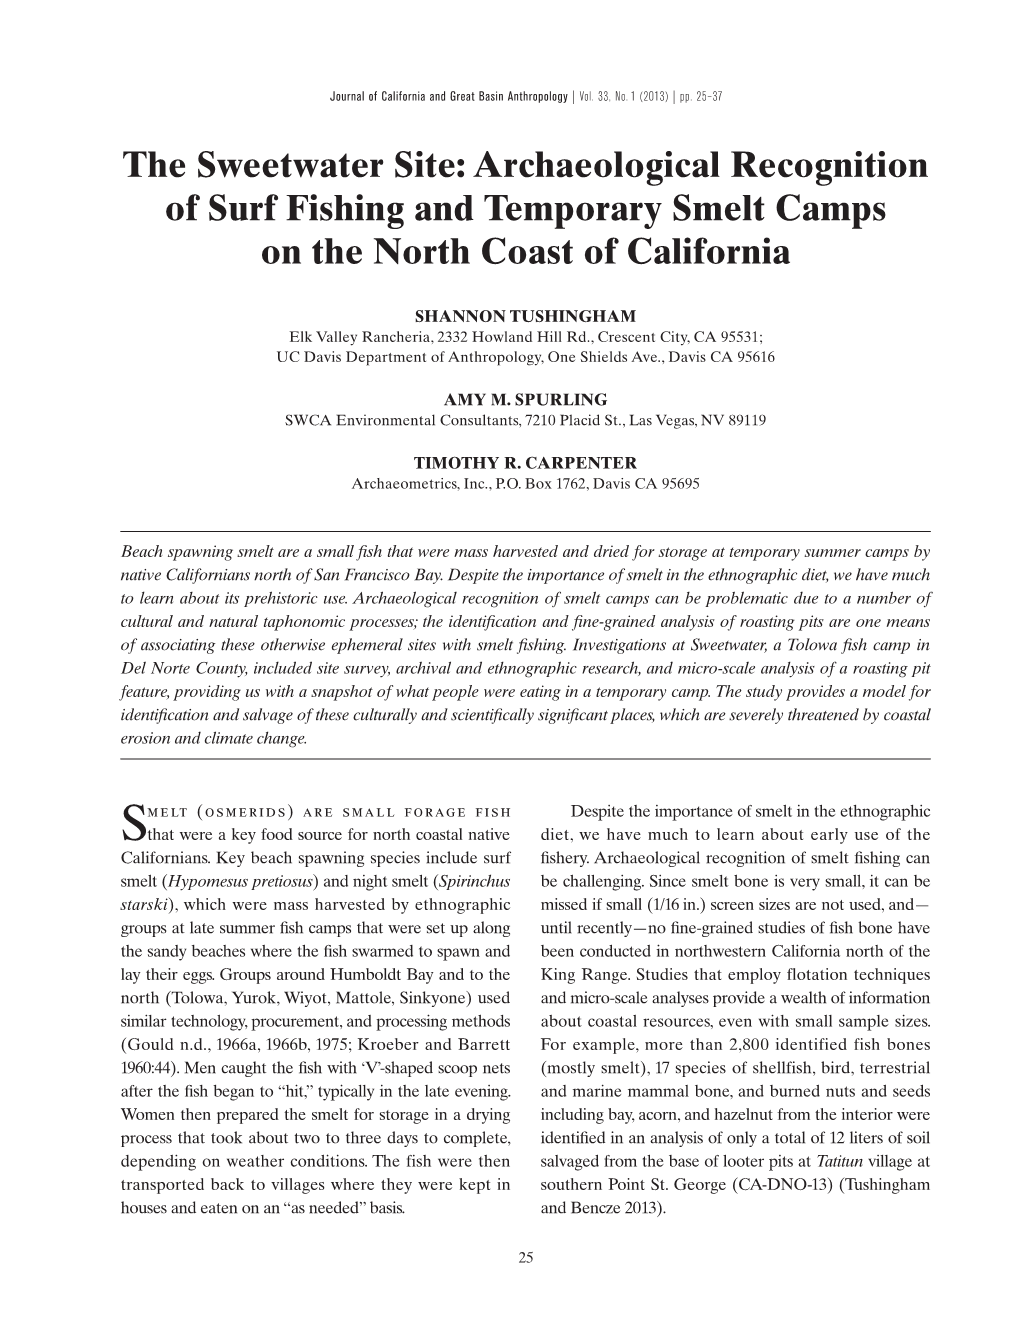 Archaeological Recognition of Surf Fishing and Temporary Smelt Camps on the North Coast of California